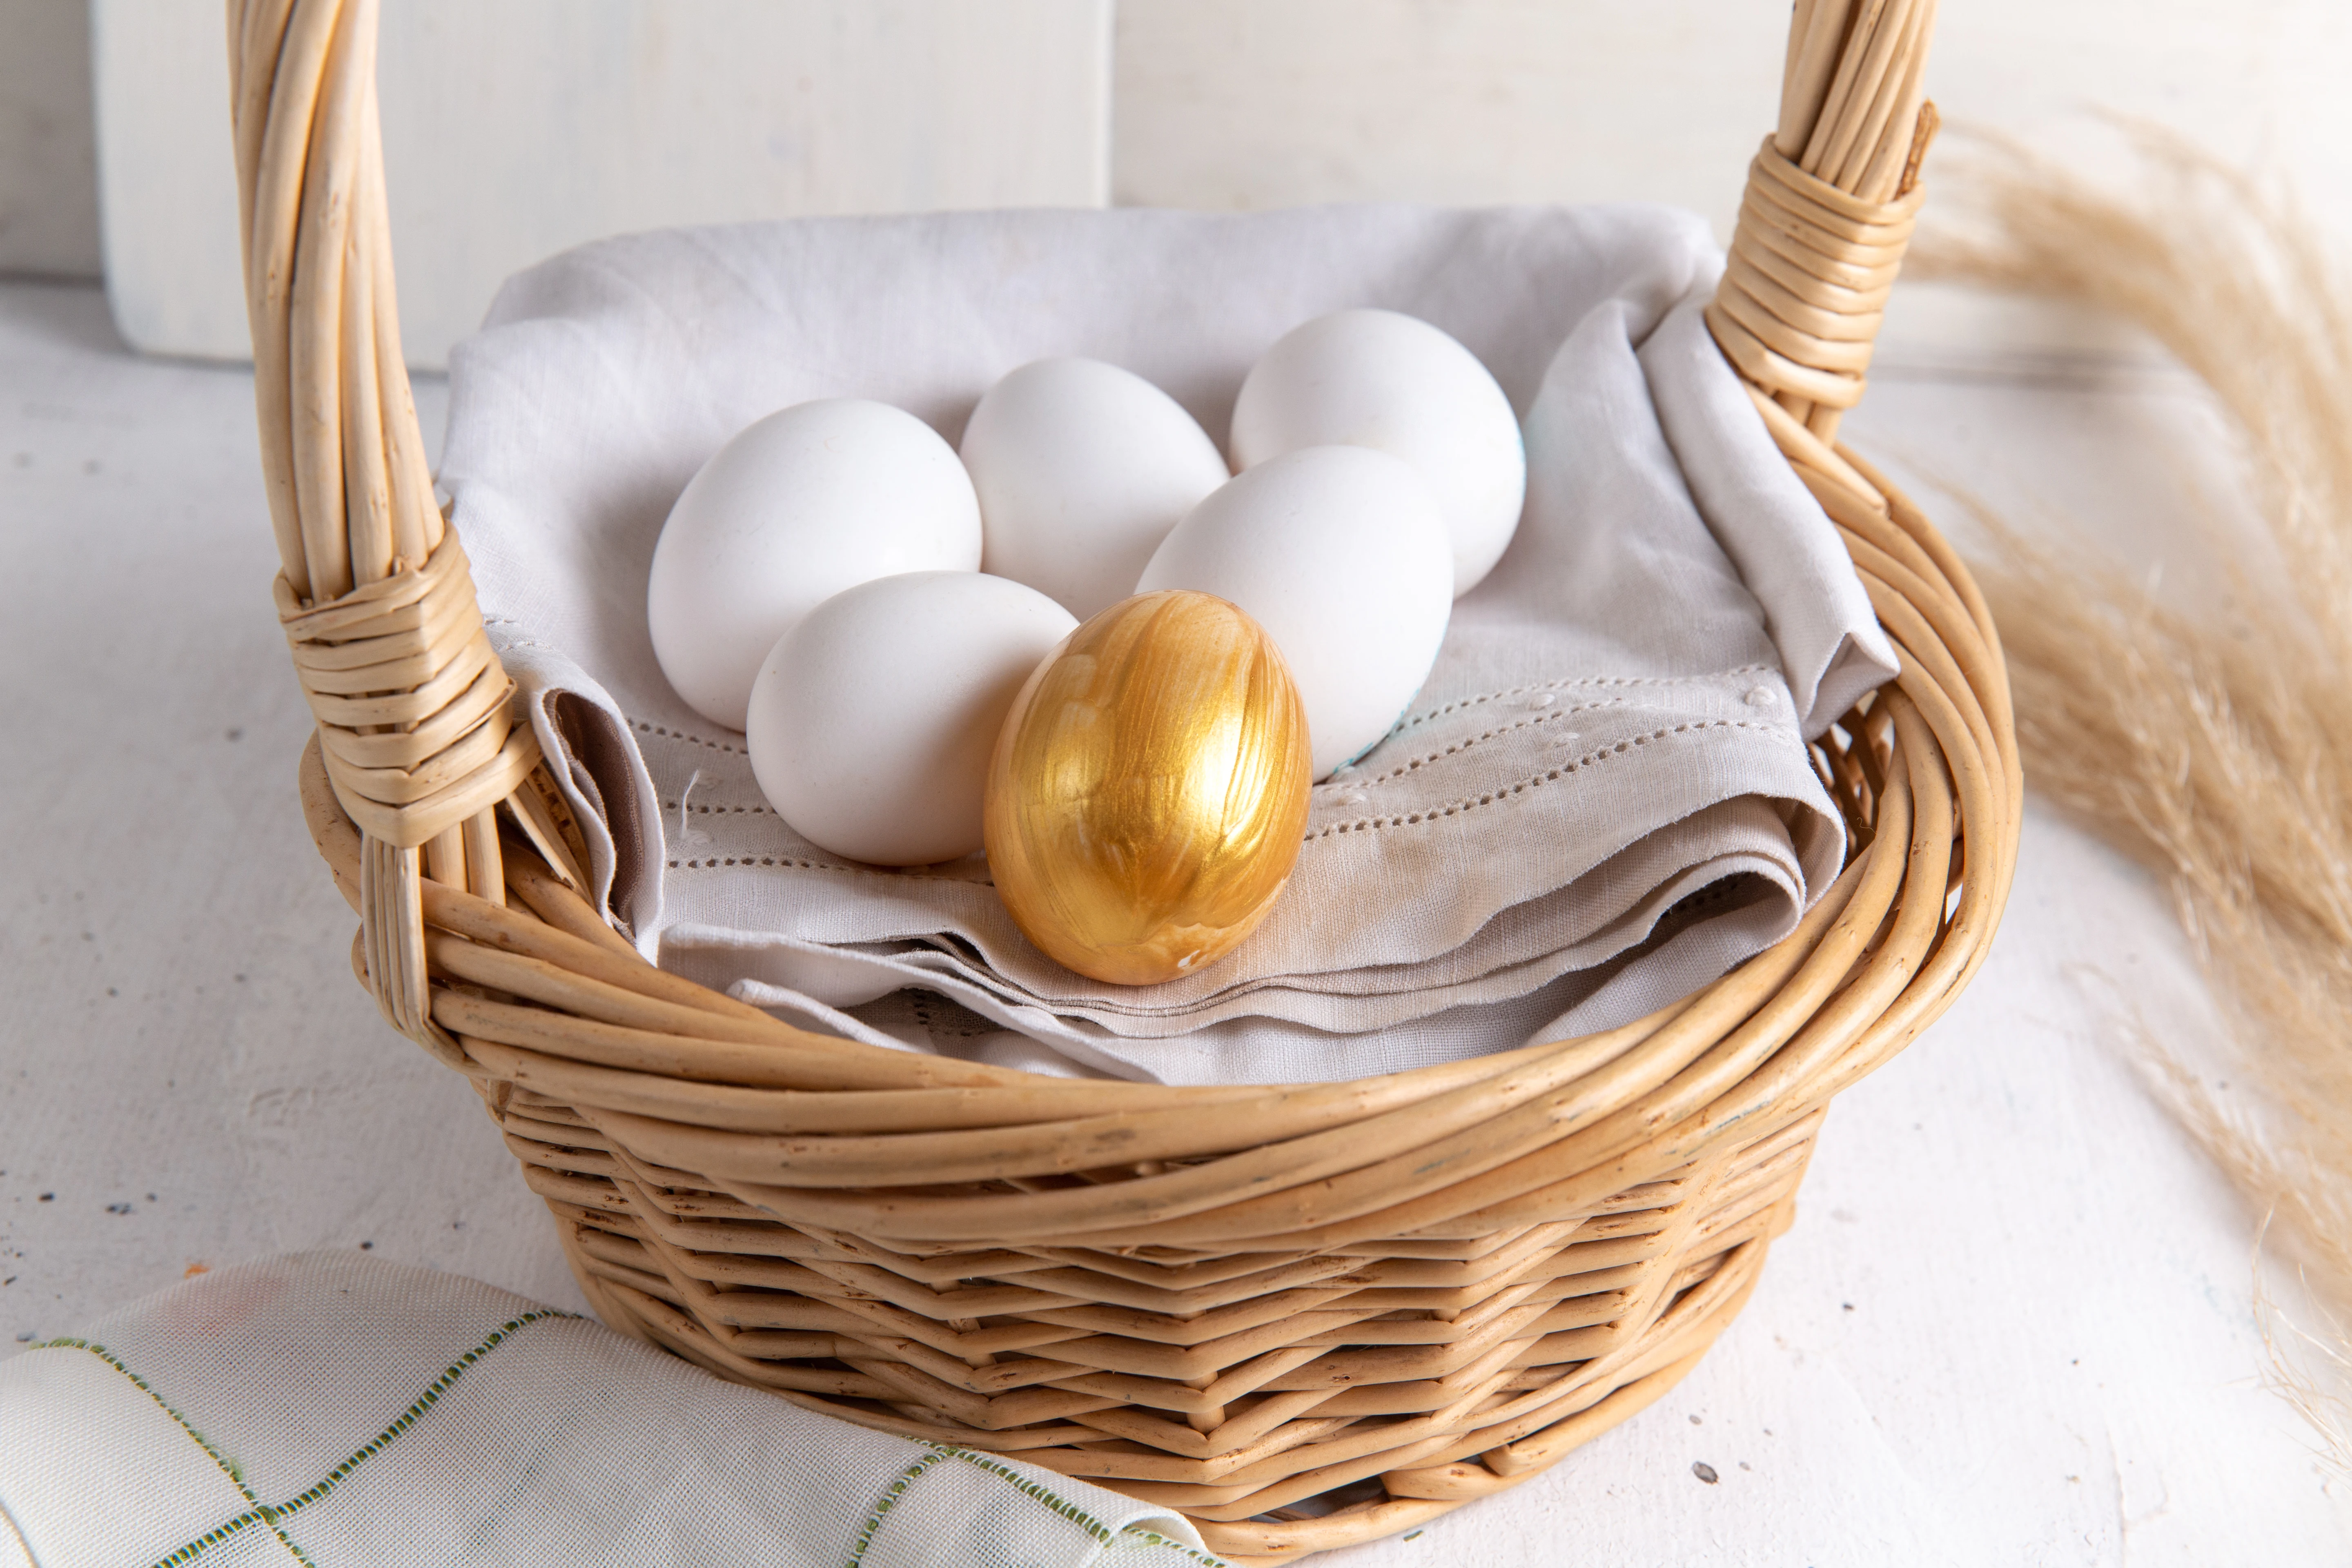 Eggs in a basket representing stocks in a portfolio with golden egg represents best stock